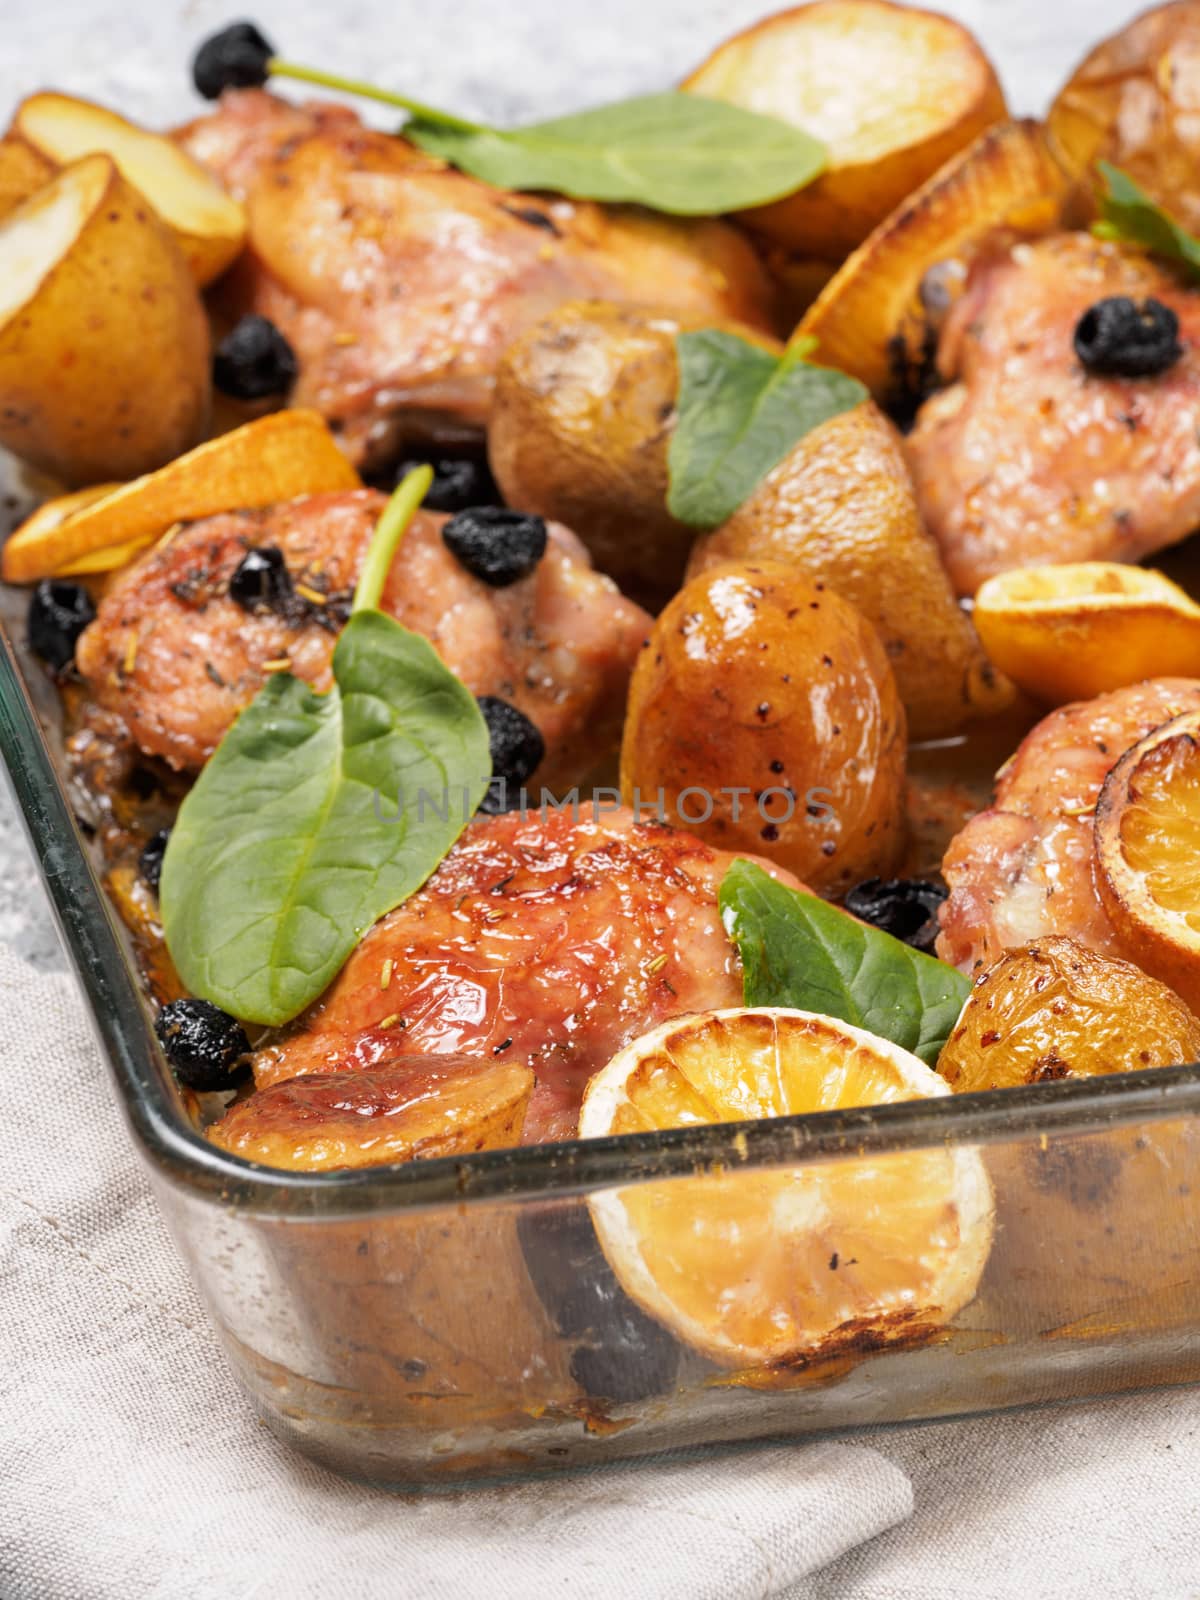 Close up view of chicken thighs with potatoes, lemon and black olives, cooked in oven on gray concrete background. Baked chicken leg quarter in heat-proof glass.